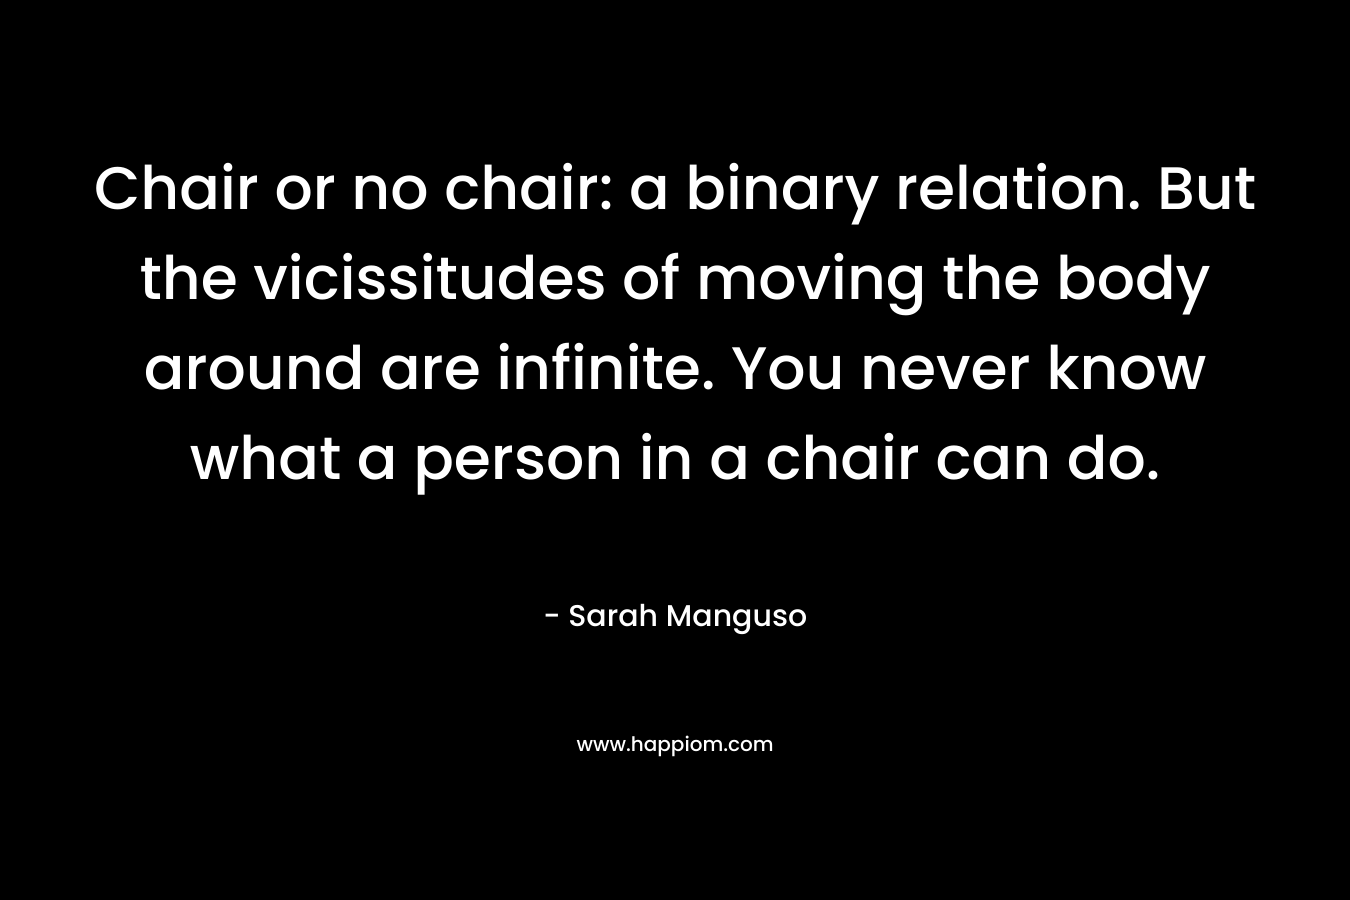 Chair or no chair: a binary relation. But the vicissitudes of moving the body around are infinite. You never know what a person in a chair can do. – Sarah Manguso